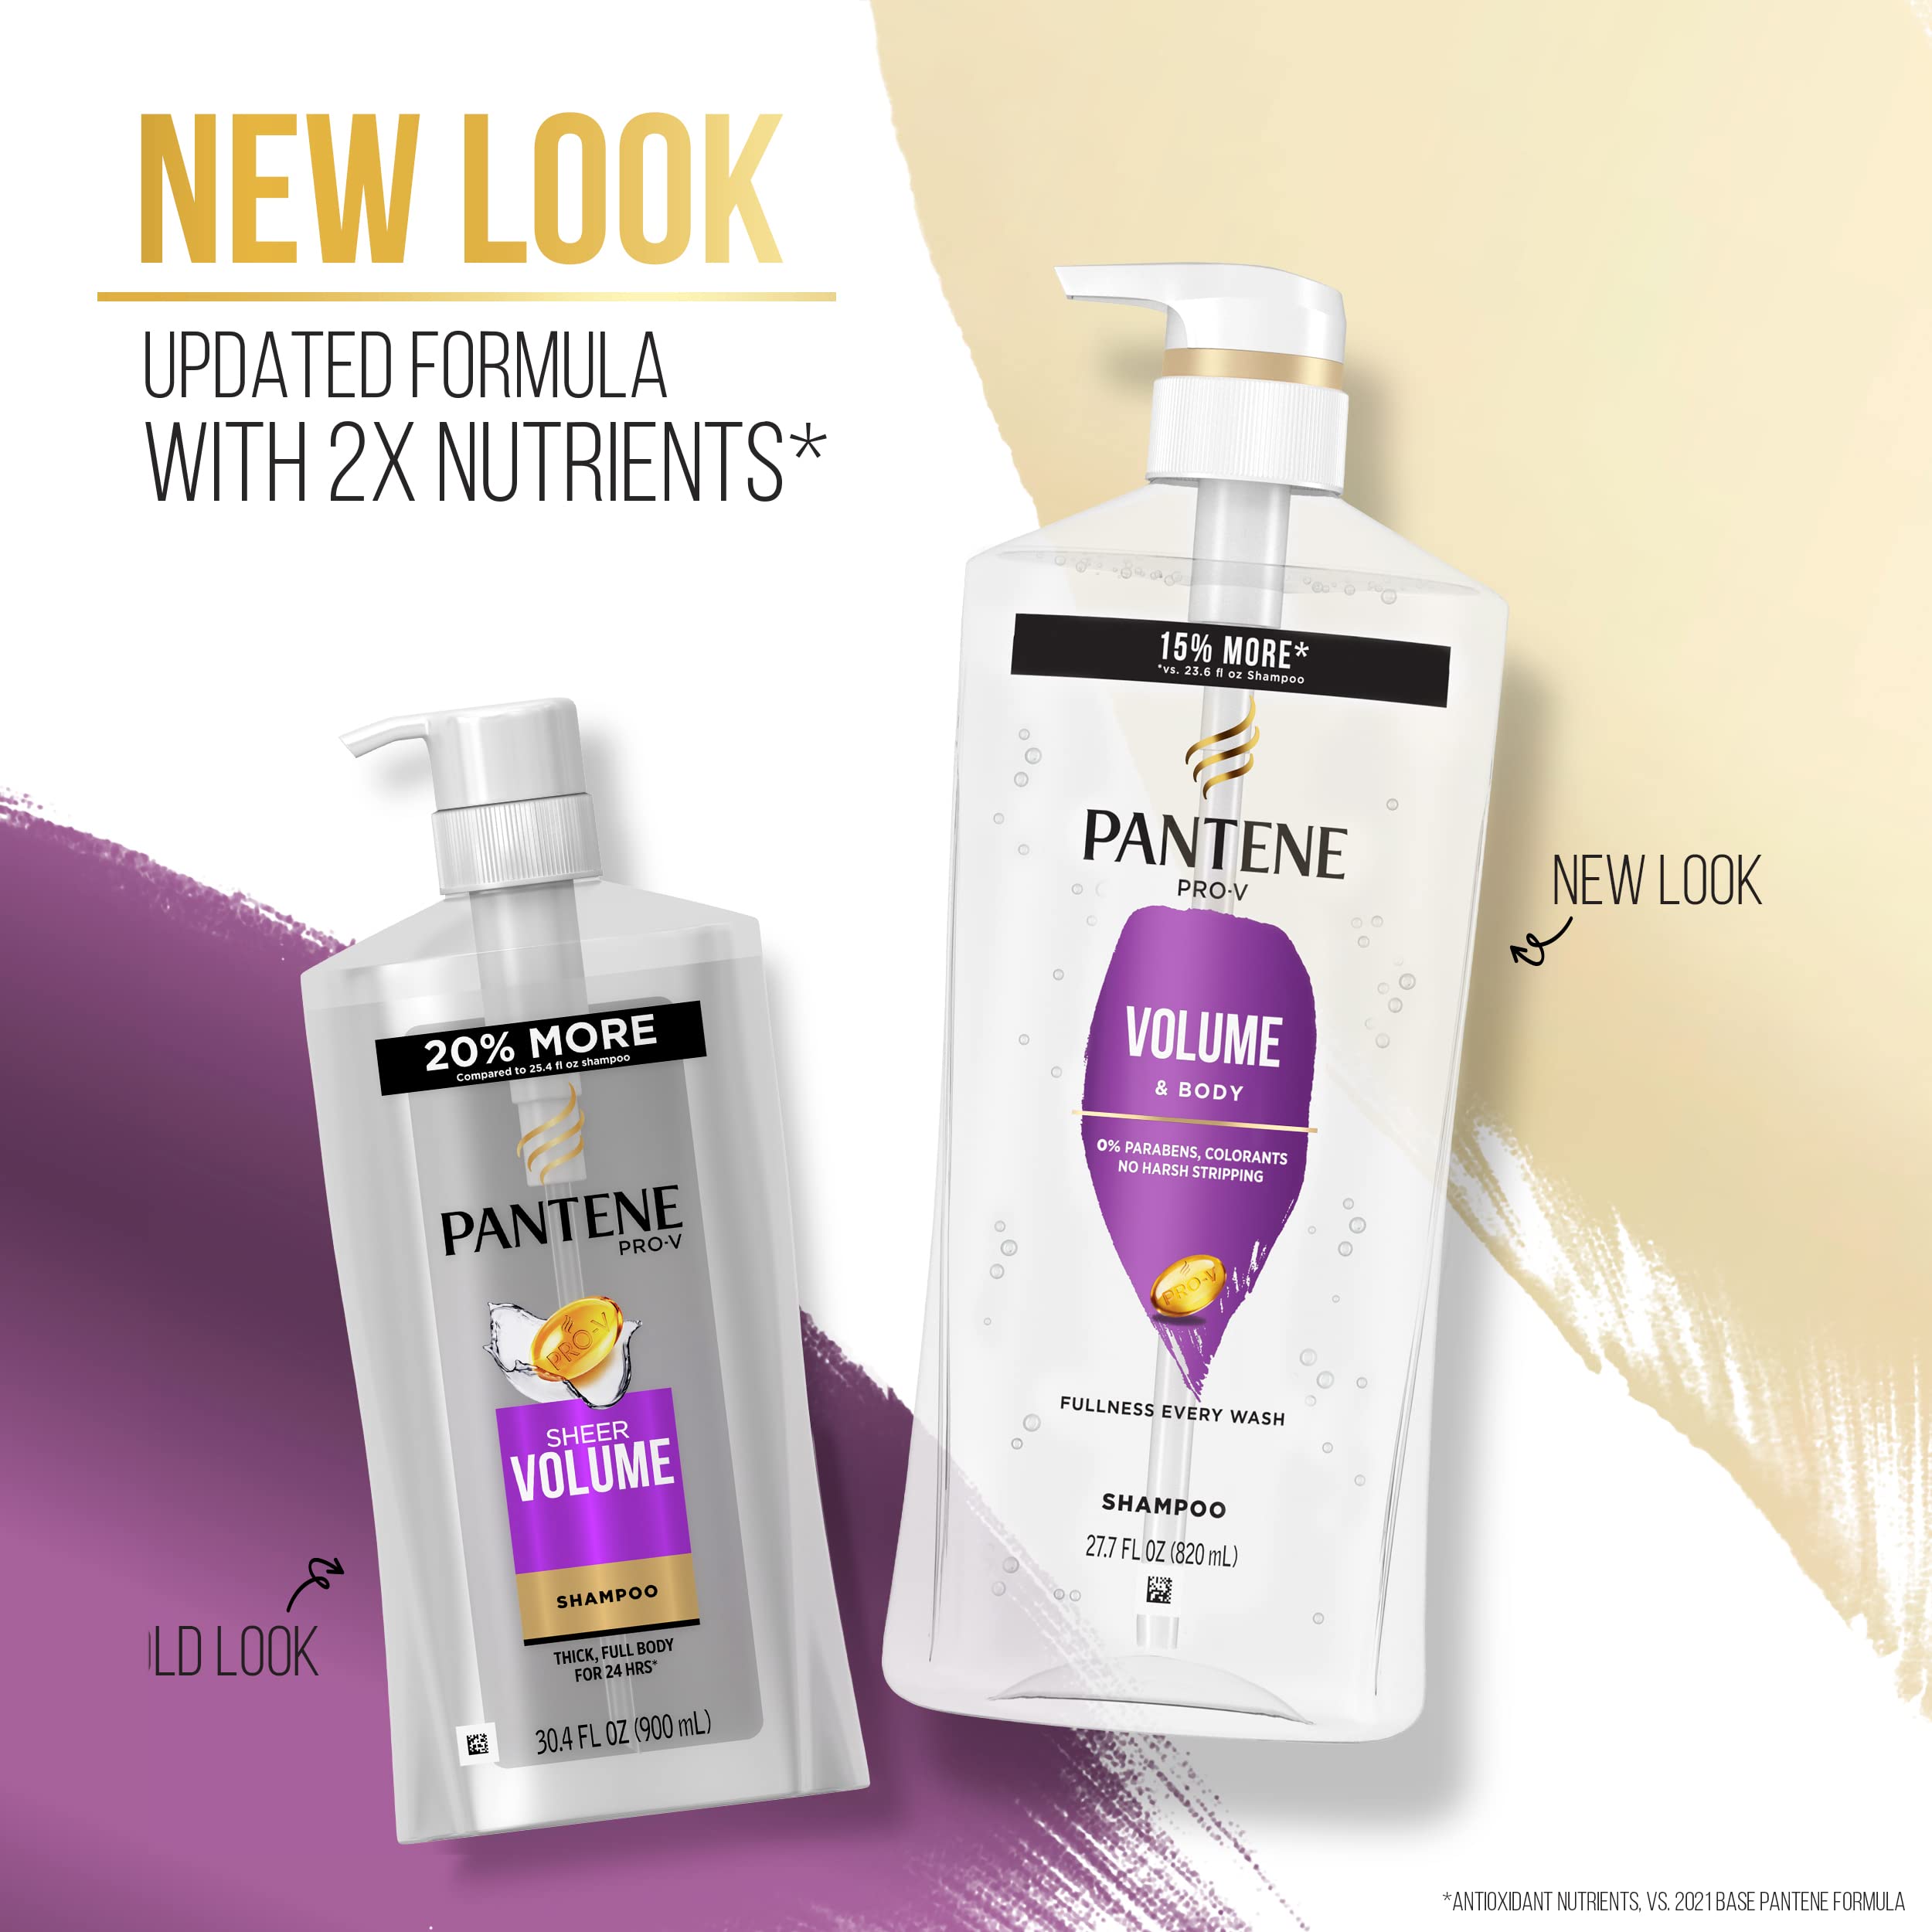 Pantene Shampoo Twin Pack with Hair Treatment, Volume & Body for Fine Hair, Safe for Color-Treated Hair